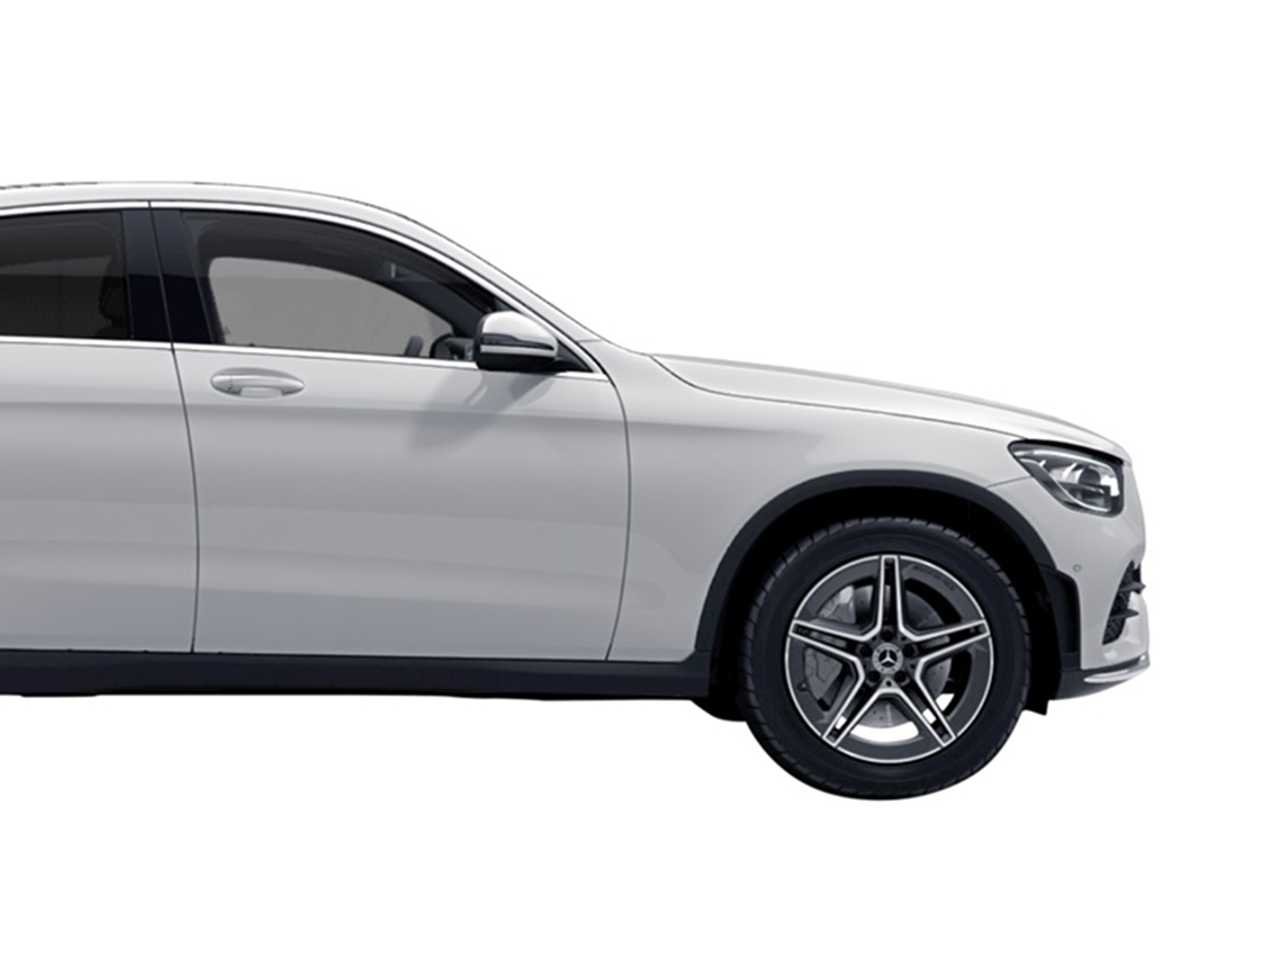 Mercedes Benz GLC 300 Coupe side view